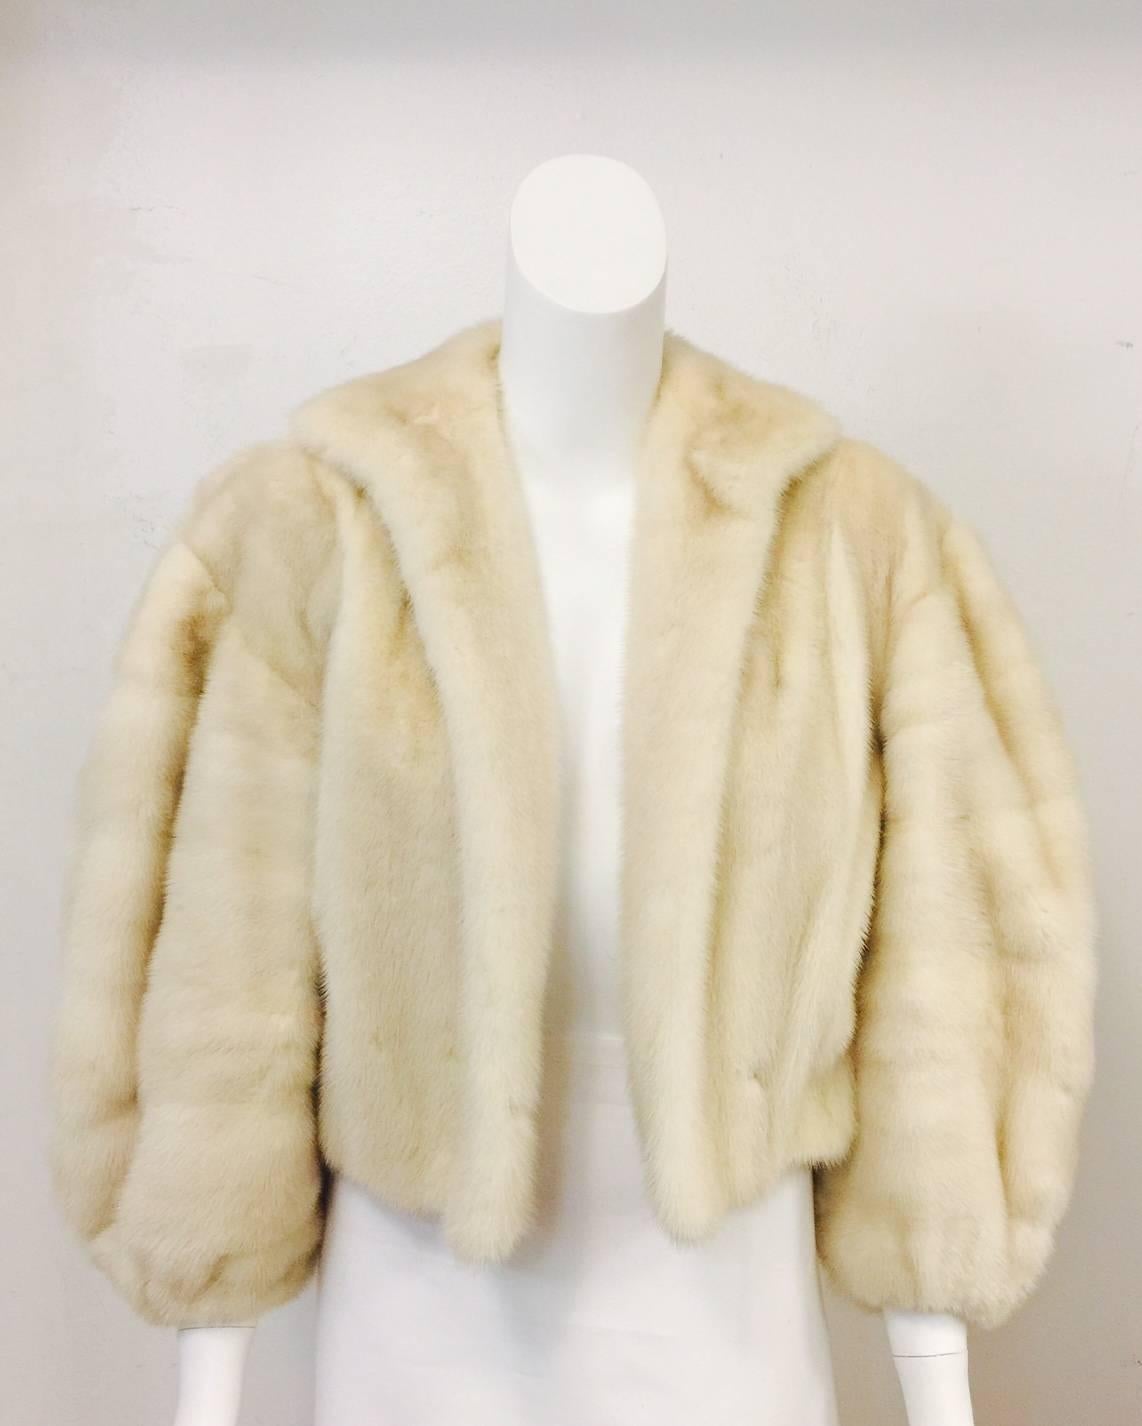 This Yves Saint Laurent Golden Pearl Mink Chubby was purchased at the legendary Alixandre Furs in New York City.  In unbelievable condition, this jacket features ultra-luxurious mink pelts and a classic 